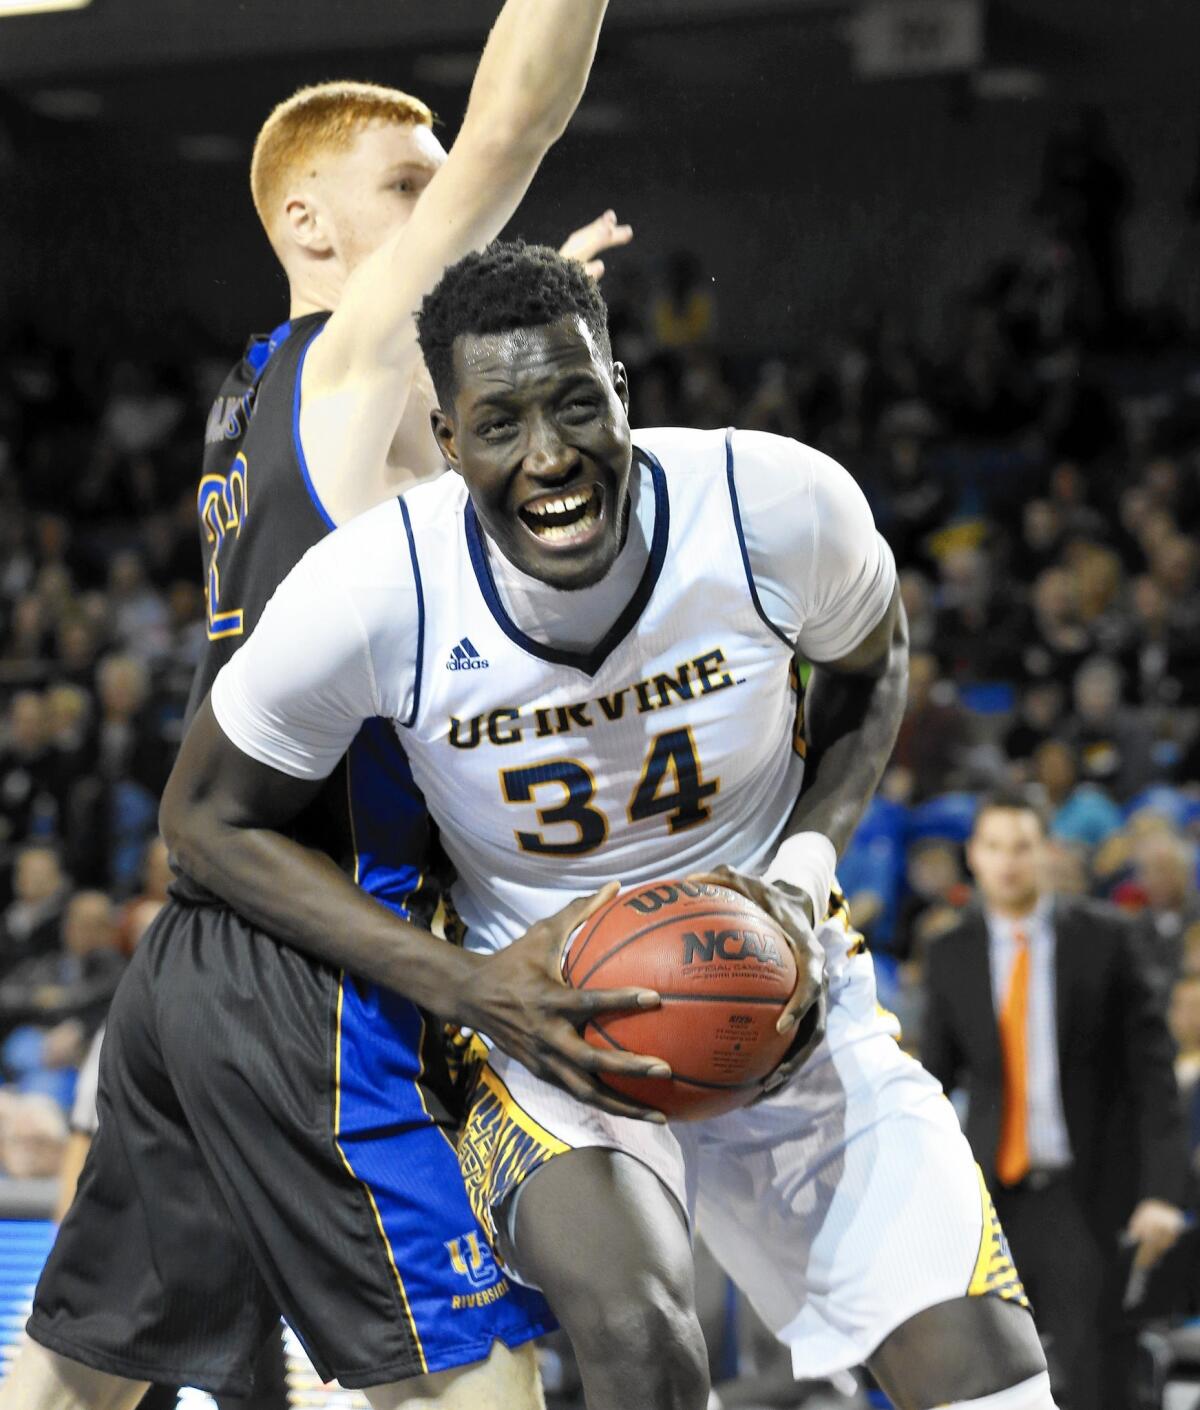 UC Irvine's Mamadou Ndiaye averages 12.3 points per game, which is second on the team. He's also a force on defense.